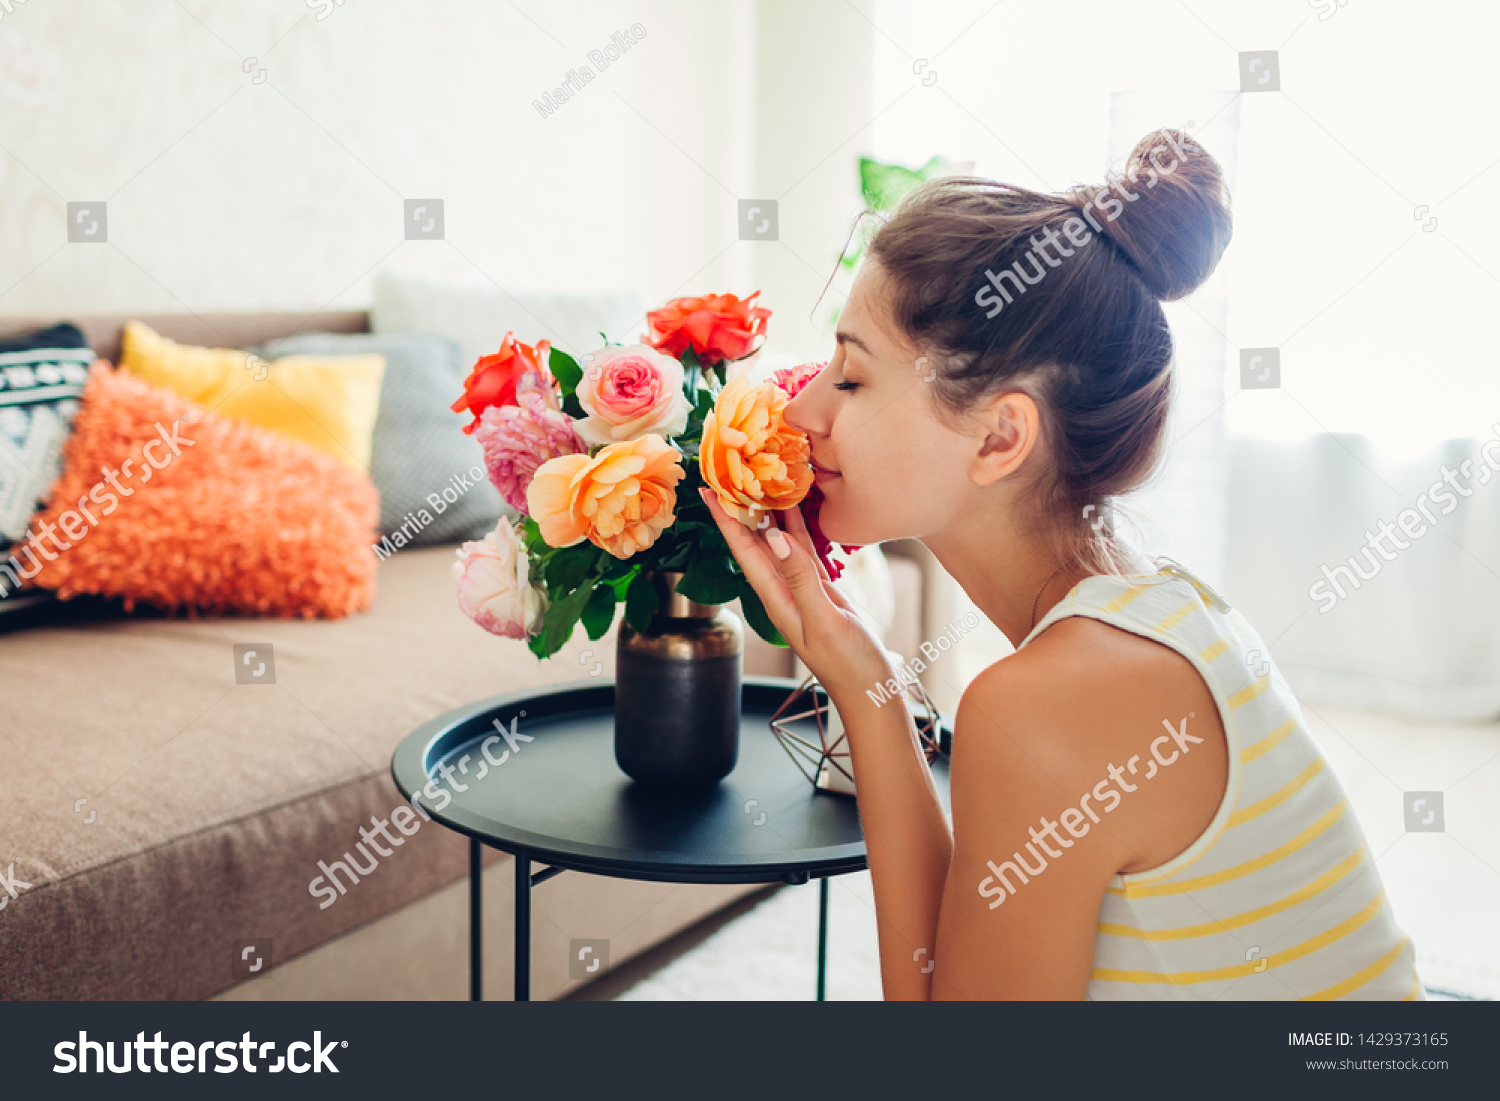 Woman smelling fresh roses in vase on table. Housewife taking care of coziness in apartment. Interior and decor #1429373165